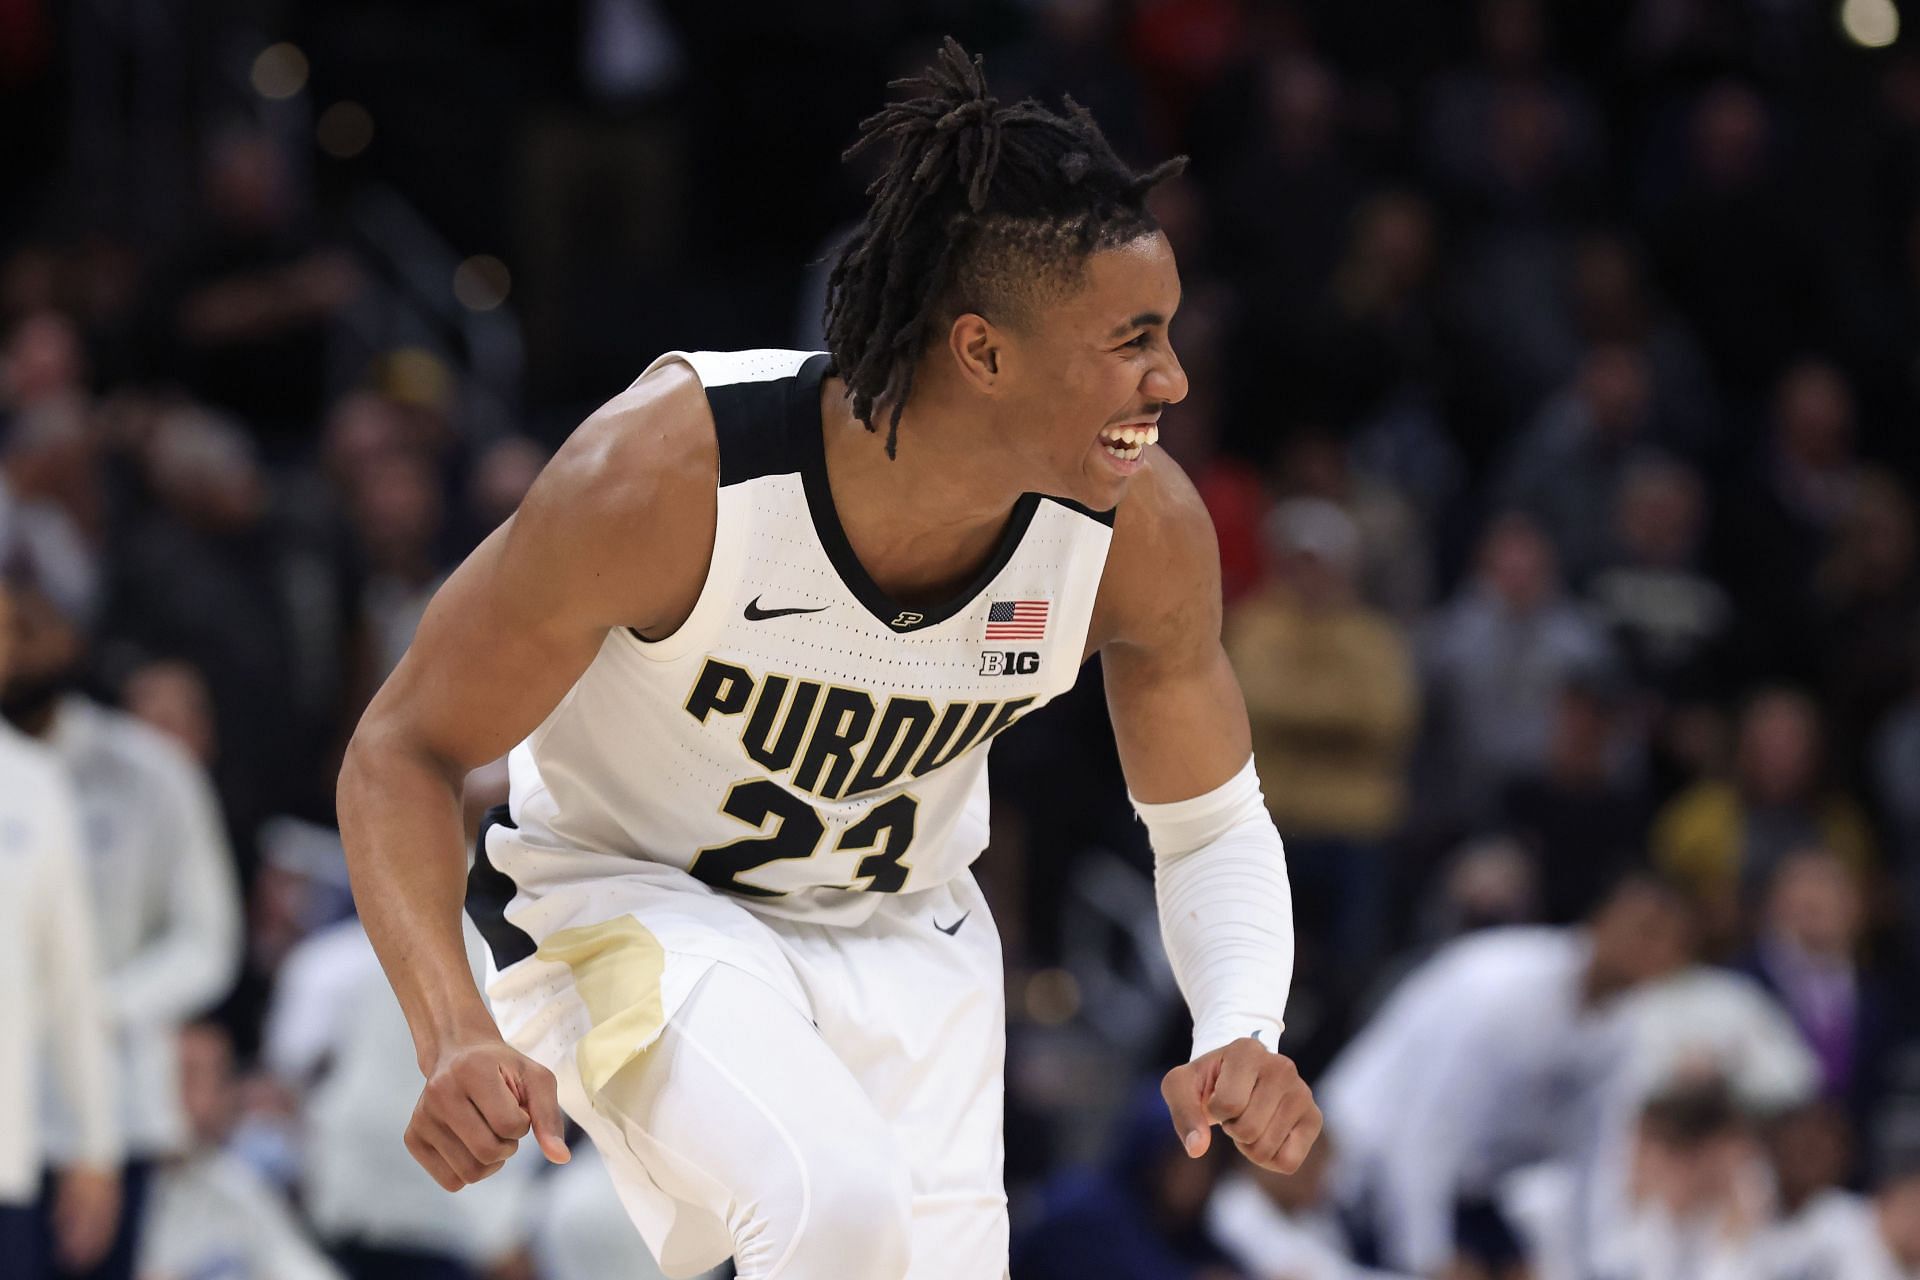 Purdue sophomore guard Jaden Ivey is ready to make some noise in March Madness